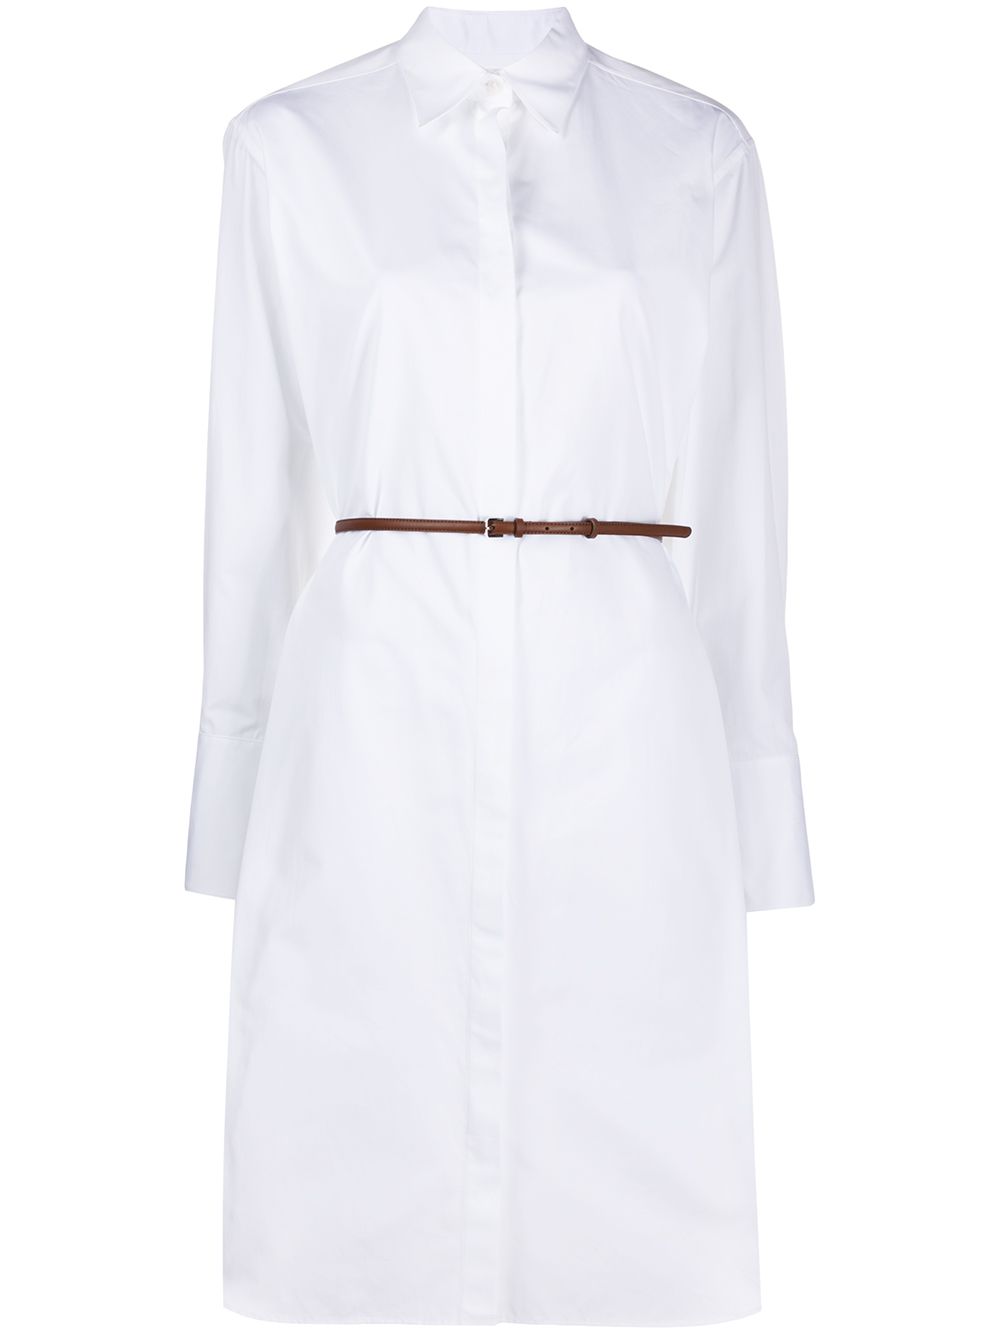 THE ROW BELTED SHIRT DRESS